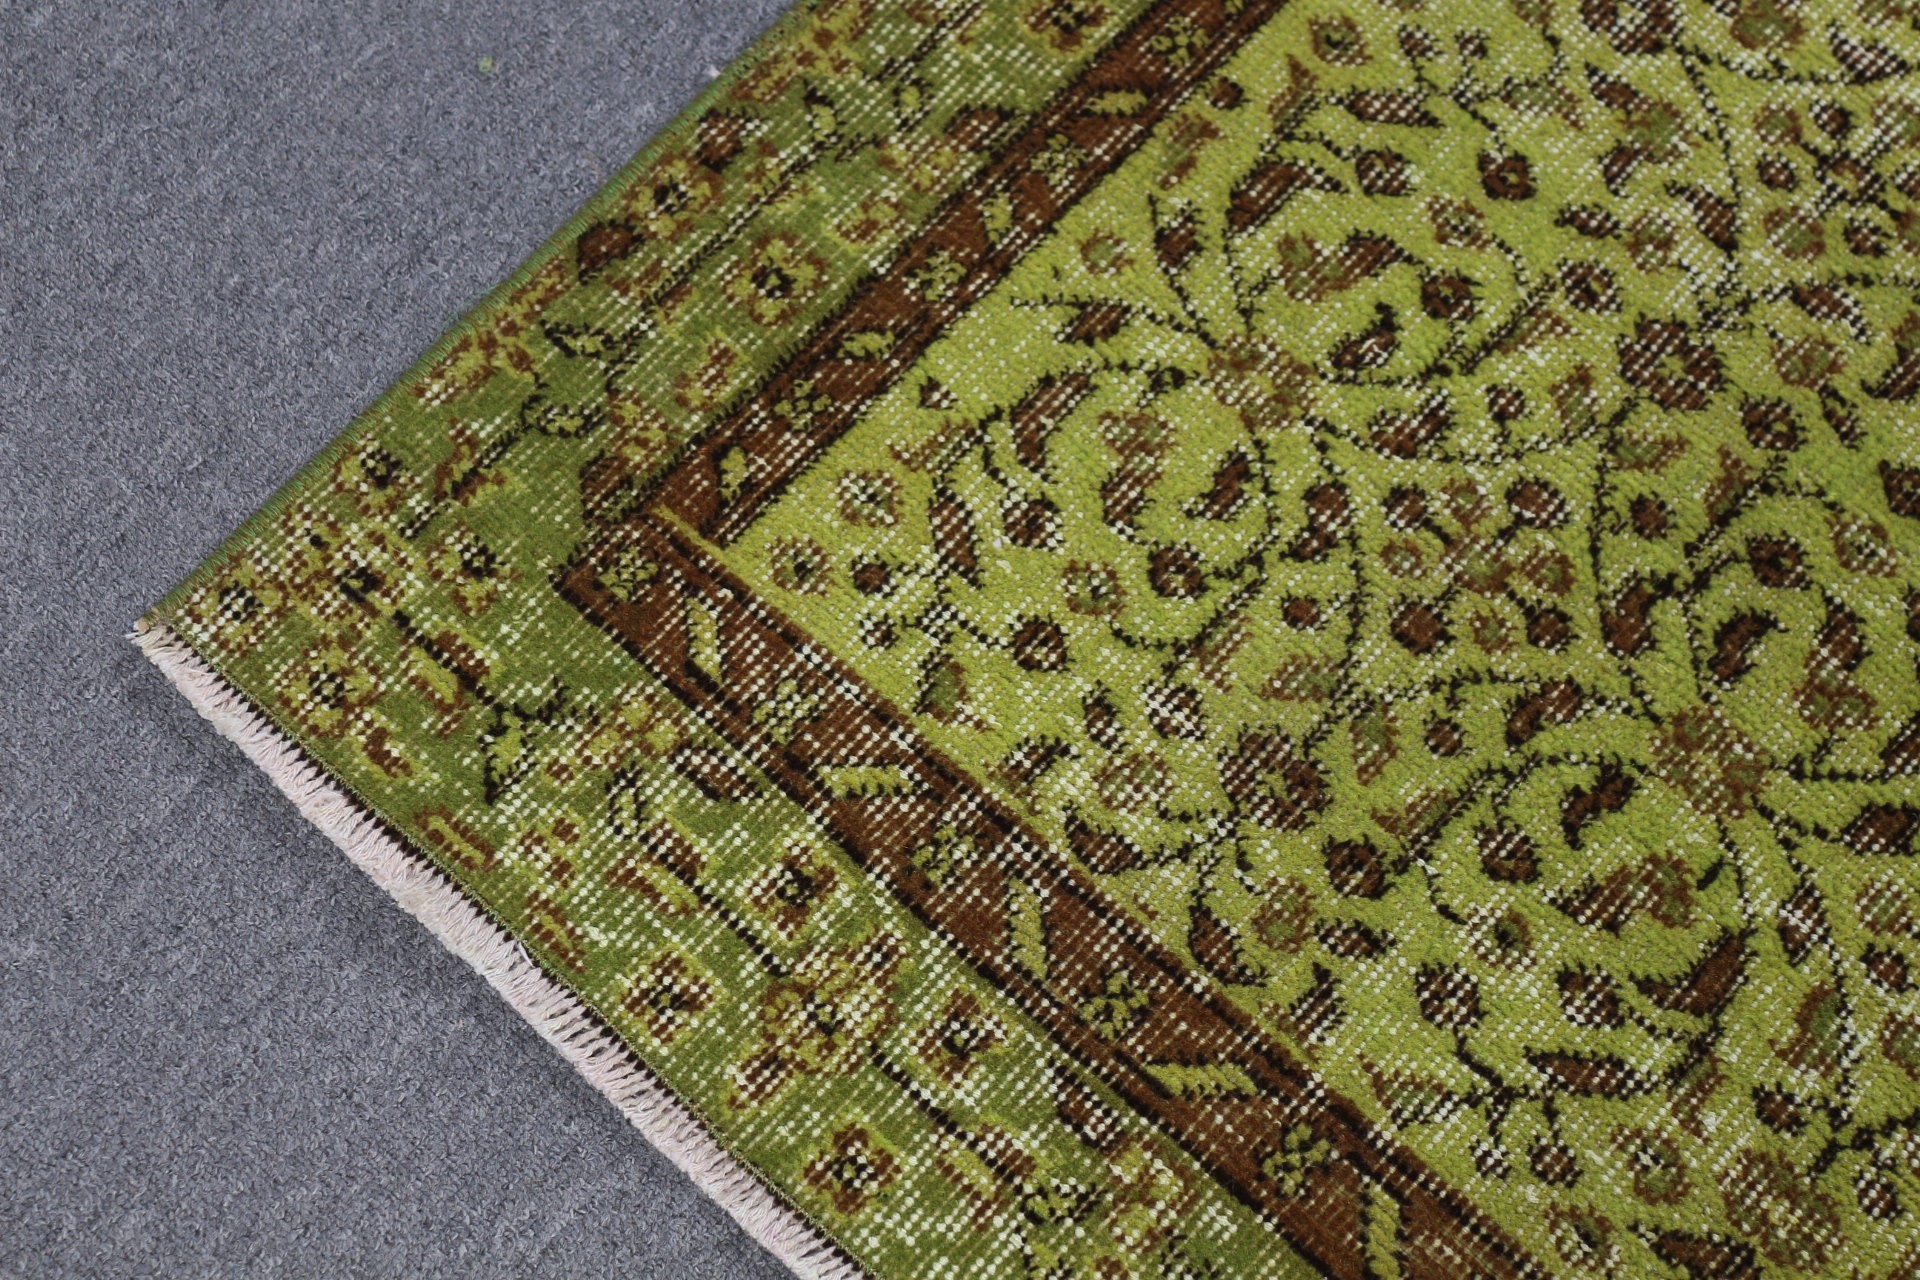 Vintage Rugs, Turkish Rug, Green Antique Rug, Rugs for Bedroom, Kitchen Rug, 3.5x6.7 ft Accent Rugs, Bright Rug, Anatolian Rug, Bedroom Rug